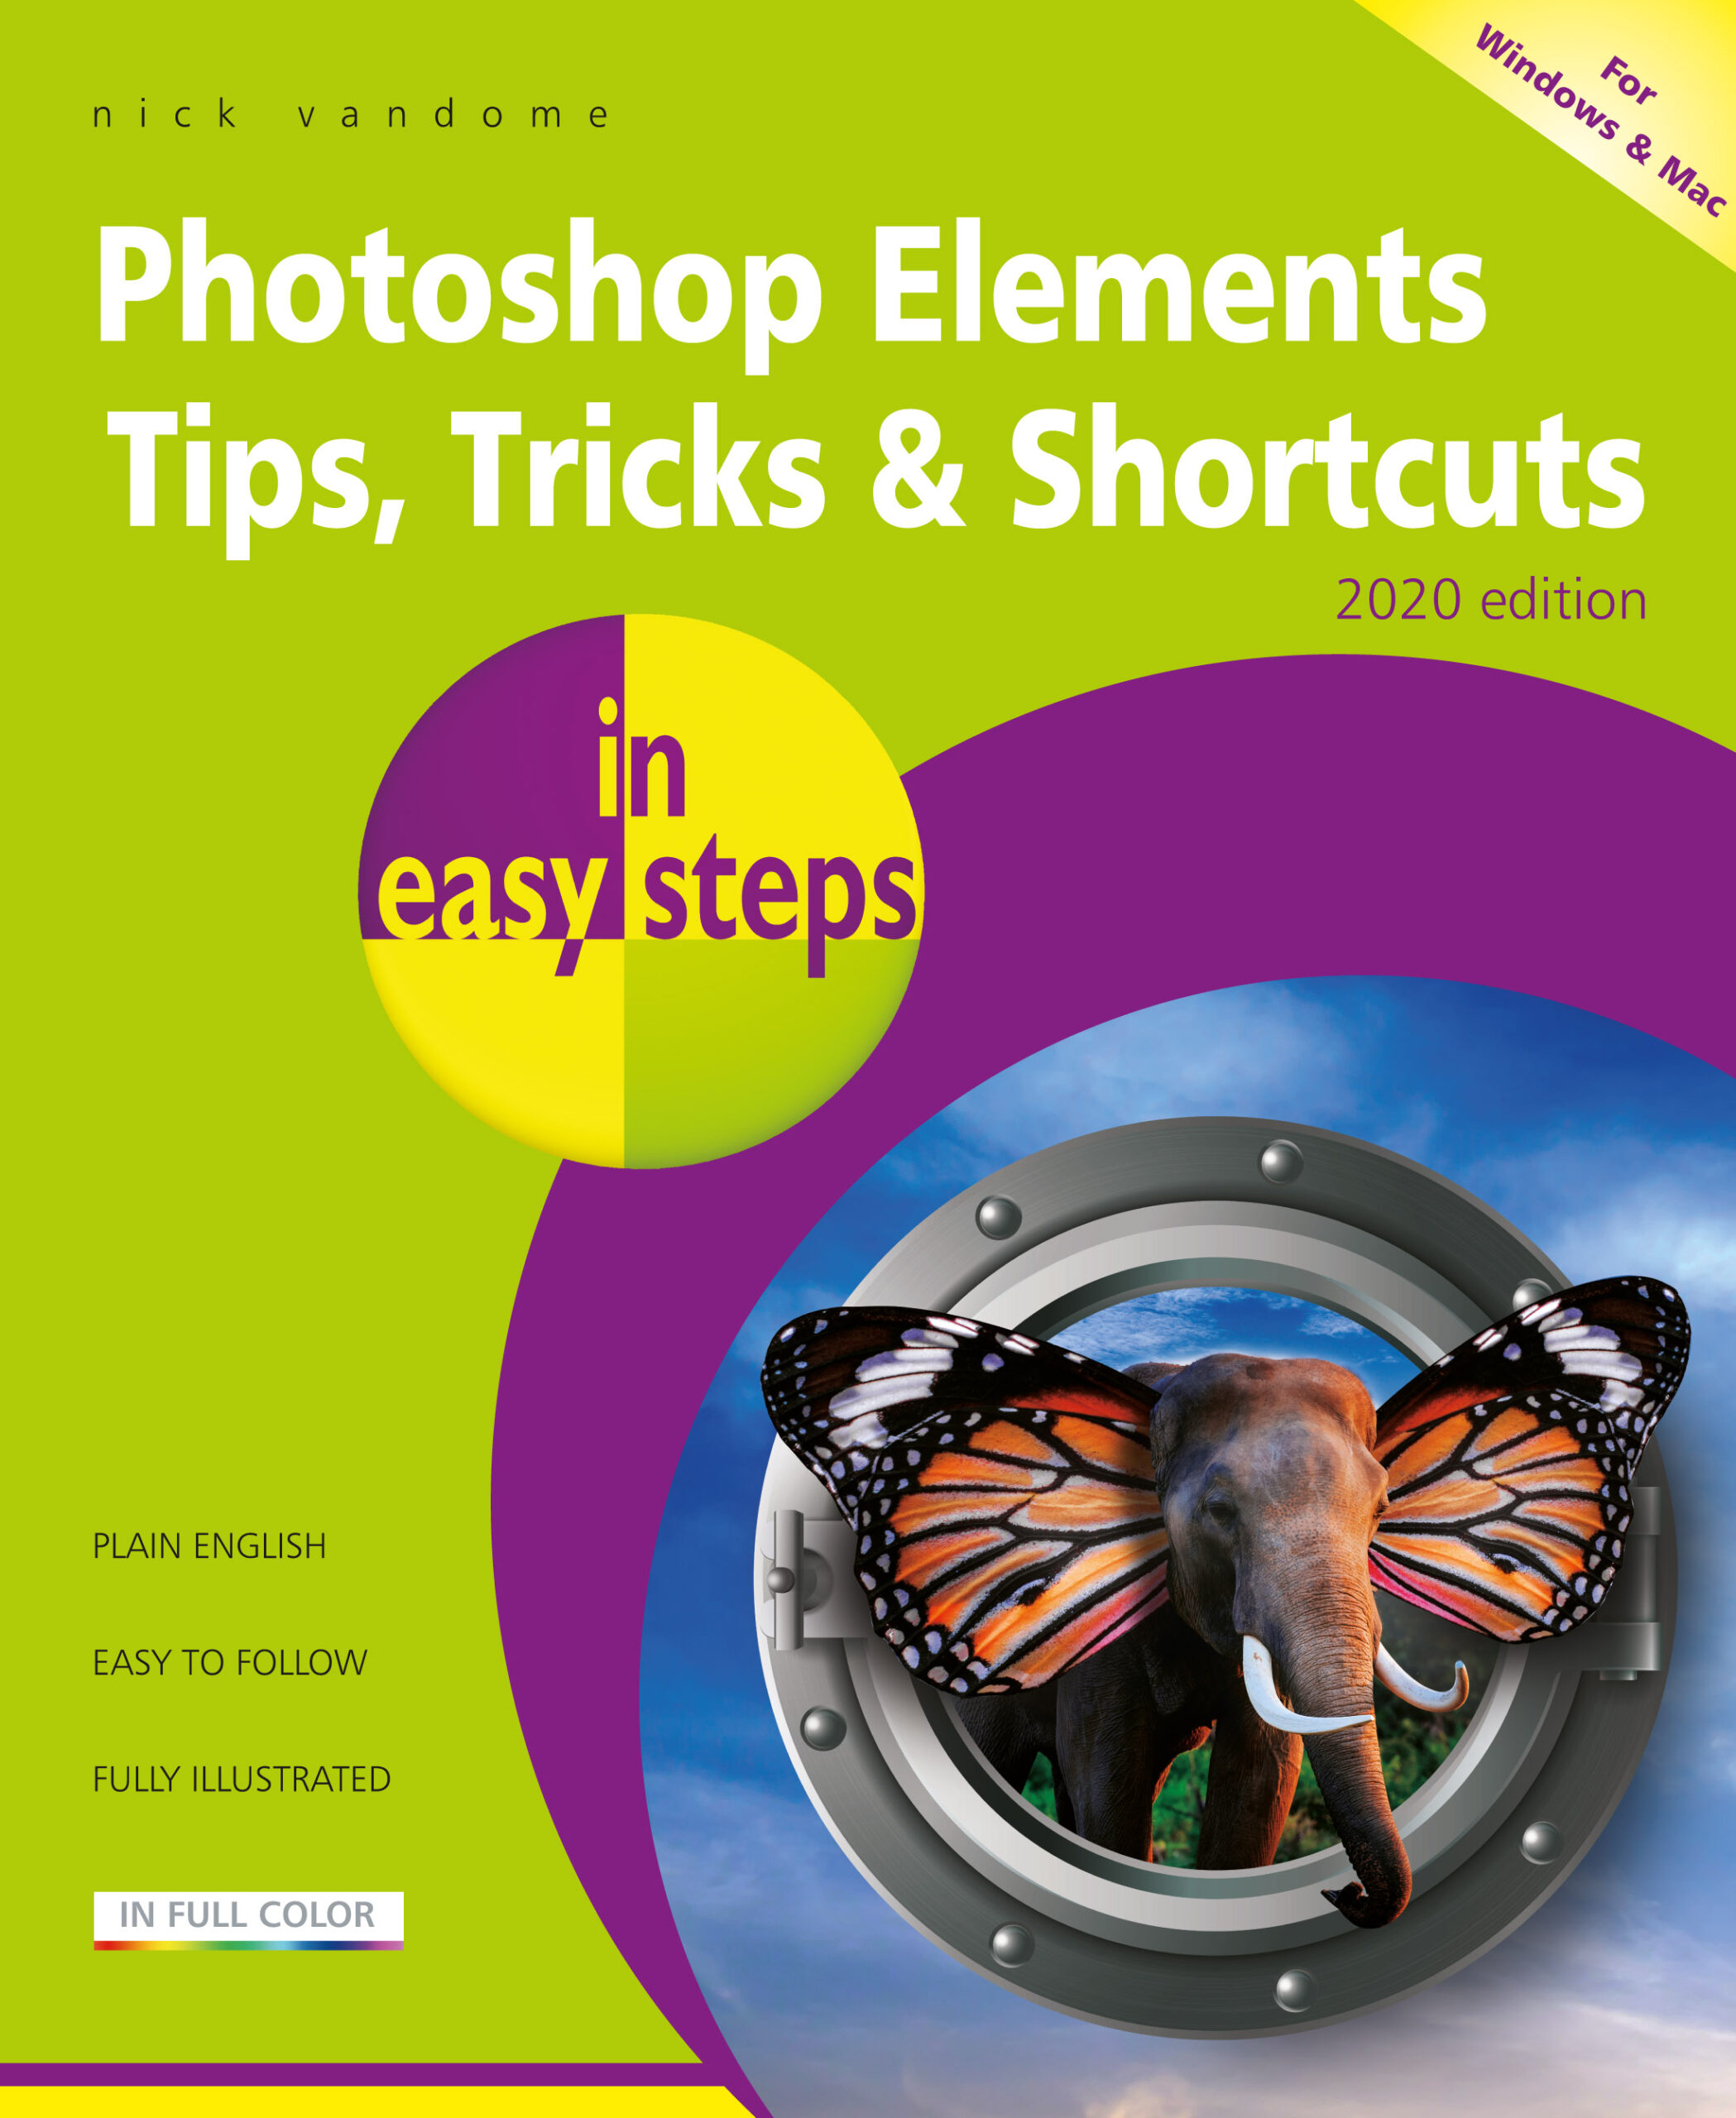 Photoshop Elements Tips, Tricks & Shortcuts in easy steps - 2020 edition